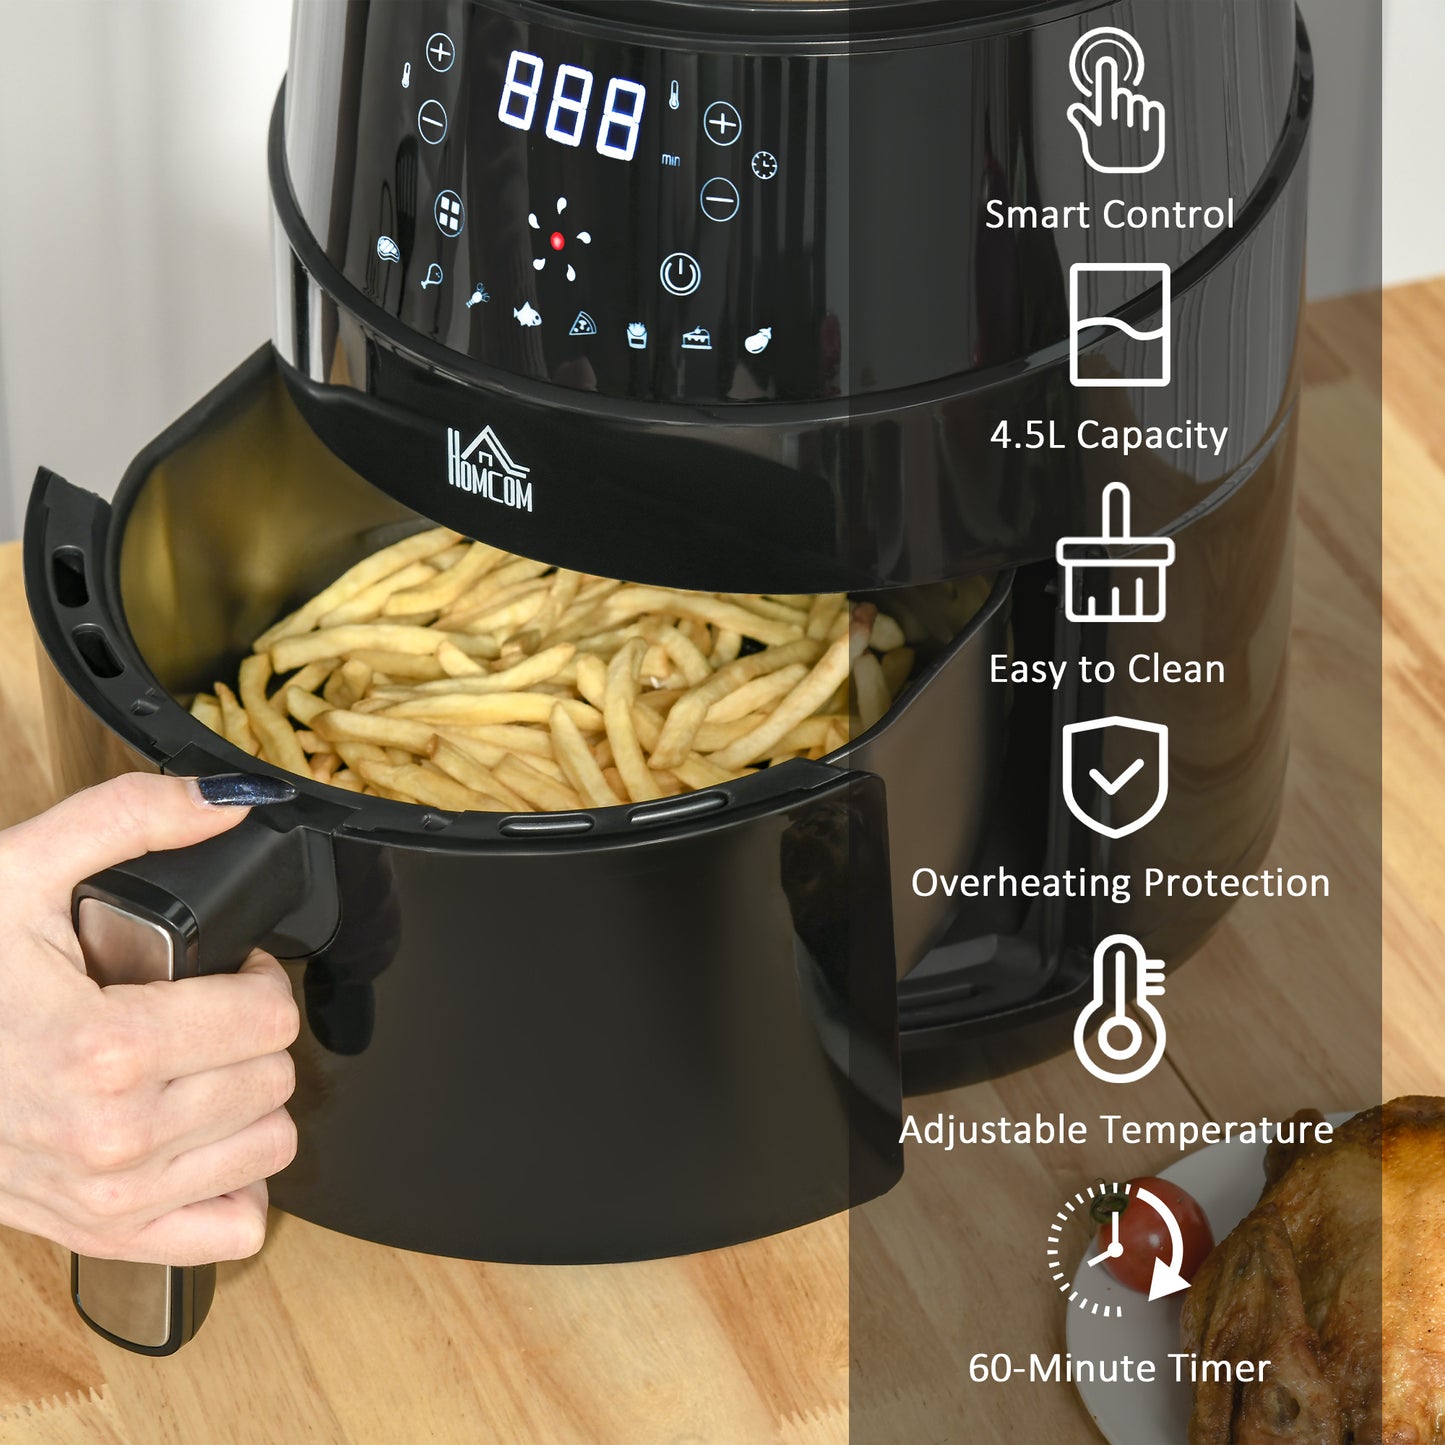 HOMCOM Air Fryer, 1500W 4.5L Air Fryers Oven with Digital Display, Rapid Air Circulation, Timer for Oil Less or Low Fat Cooking, Black